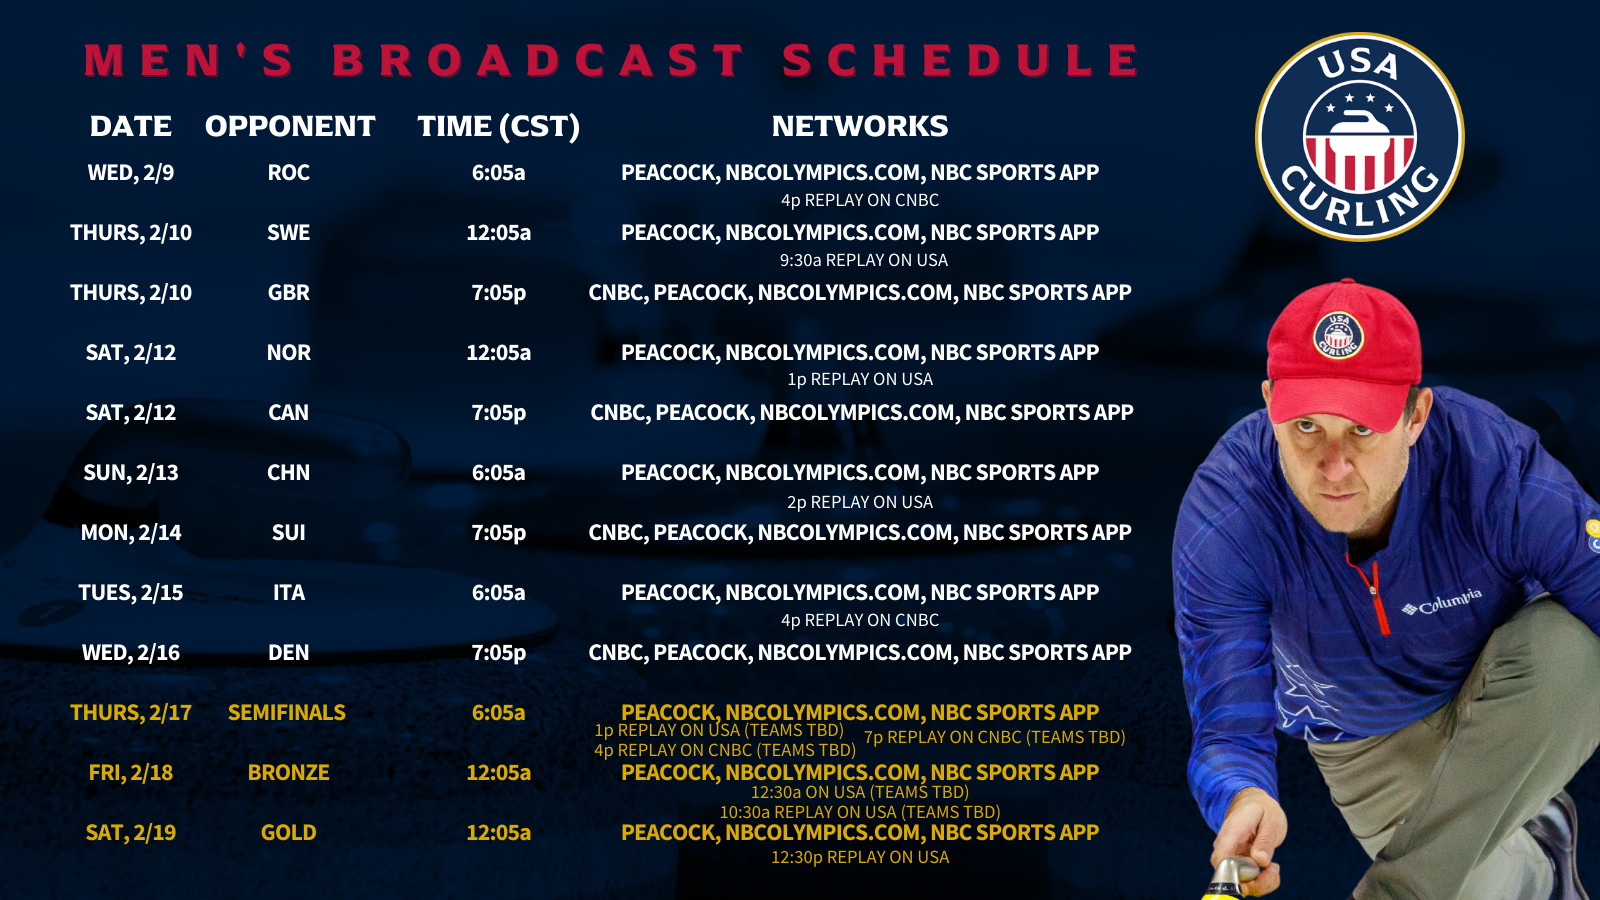 2022 TEAM USA MENS AND WOMENS BROADCAST SCHEDULE — USA CURLING